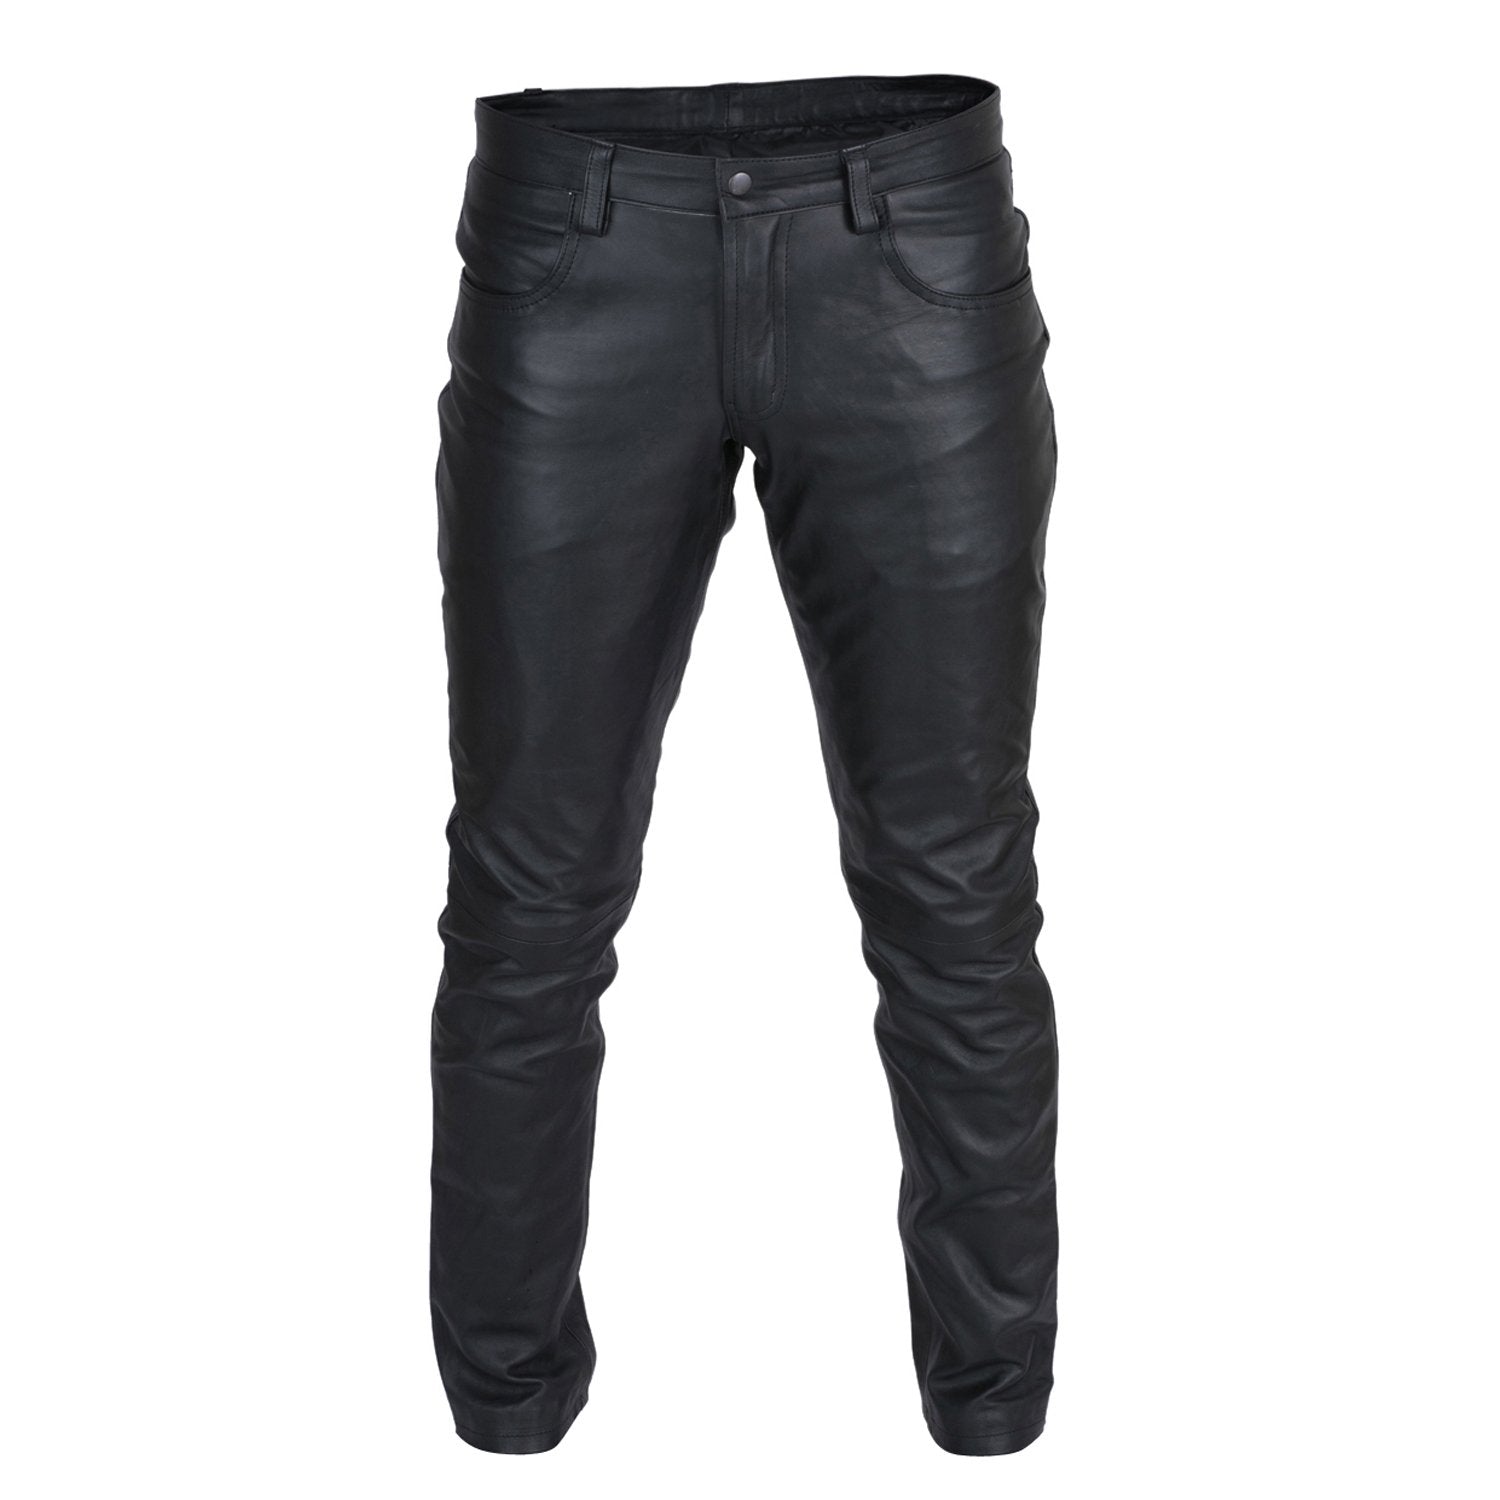 Mens Black Fashion Leather Quilted Pants  Quilted pants, Black fashion,  Mens leather pants